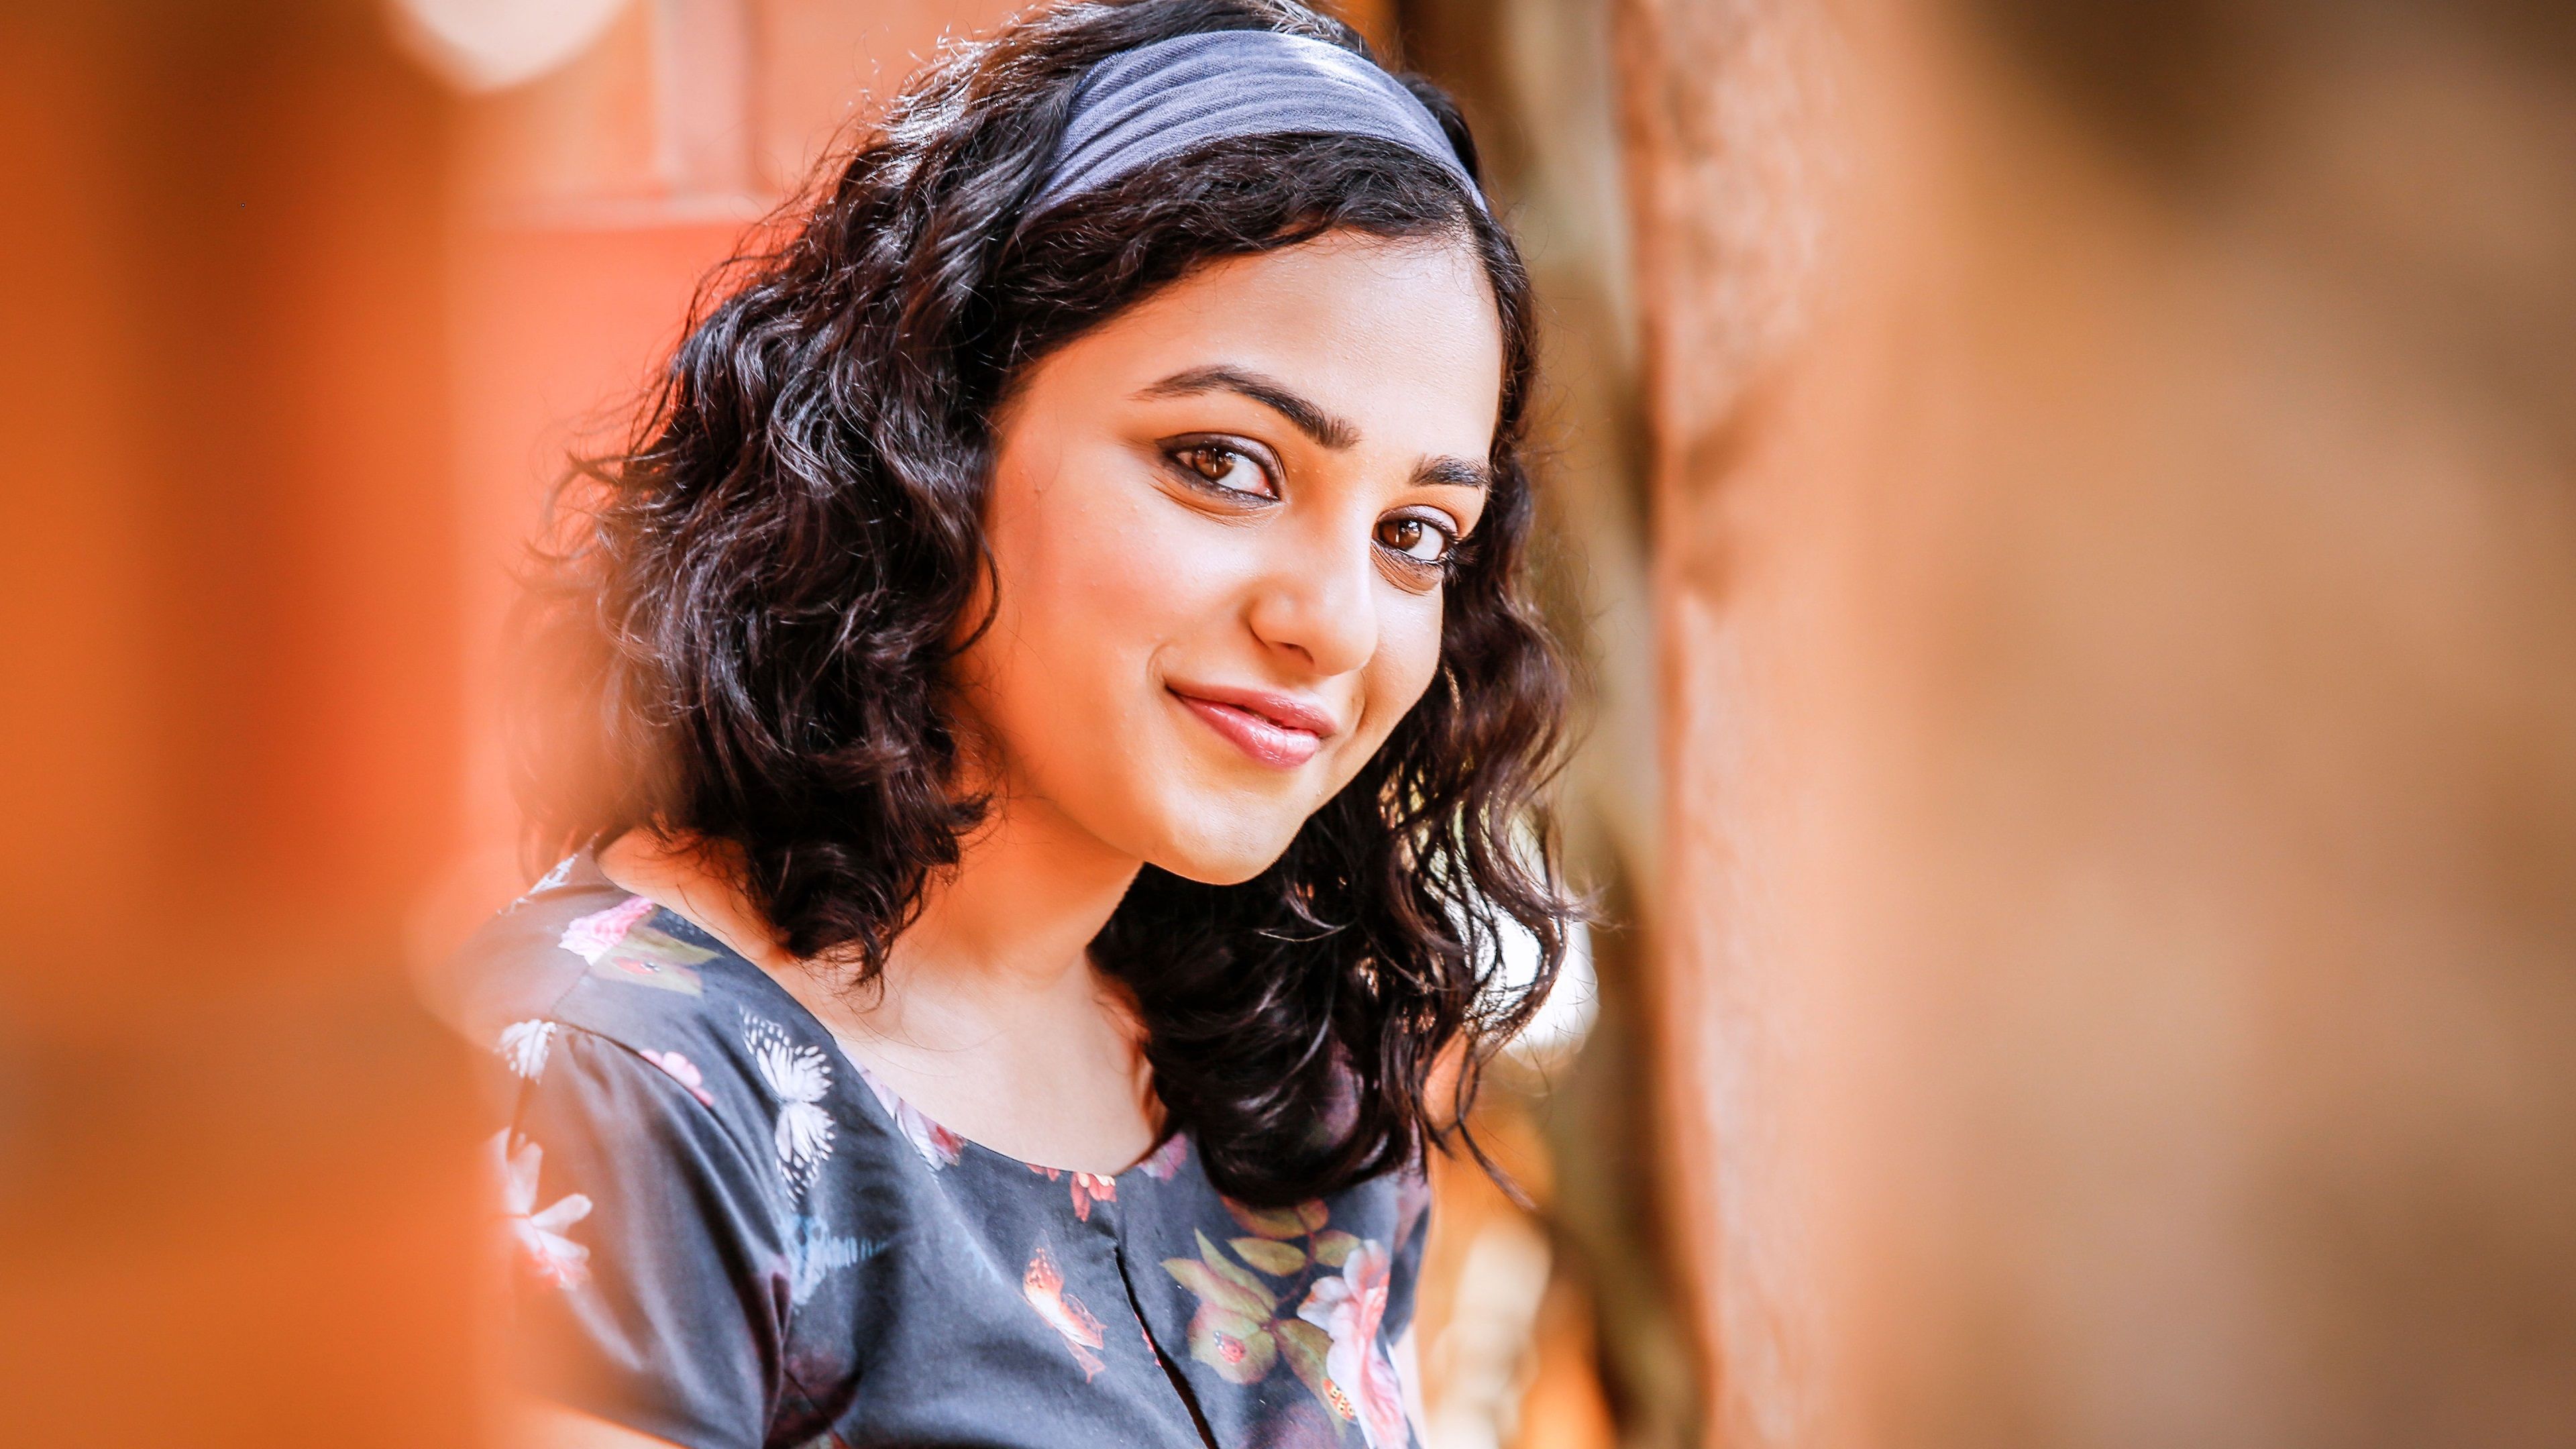 🔥Nithya Menon HD Wallpapers (Desktop Background / Android / iPhone)  (1080p, 4k) - #17632